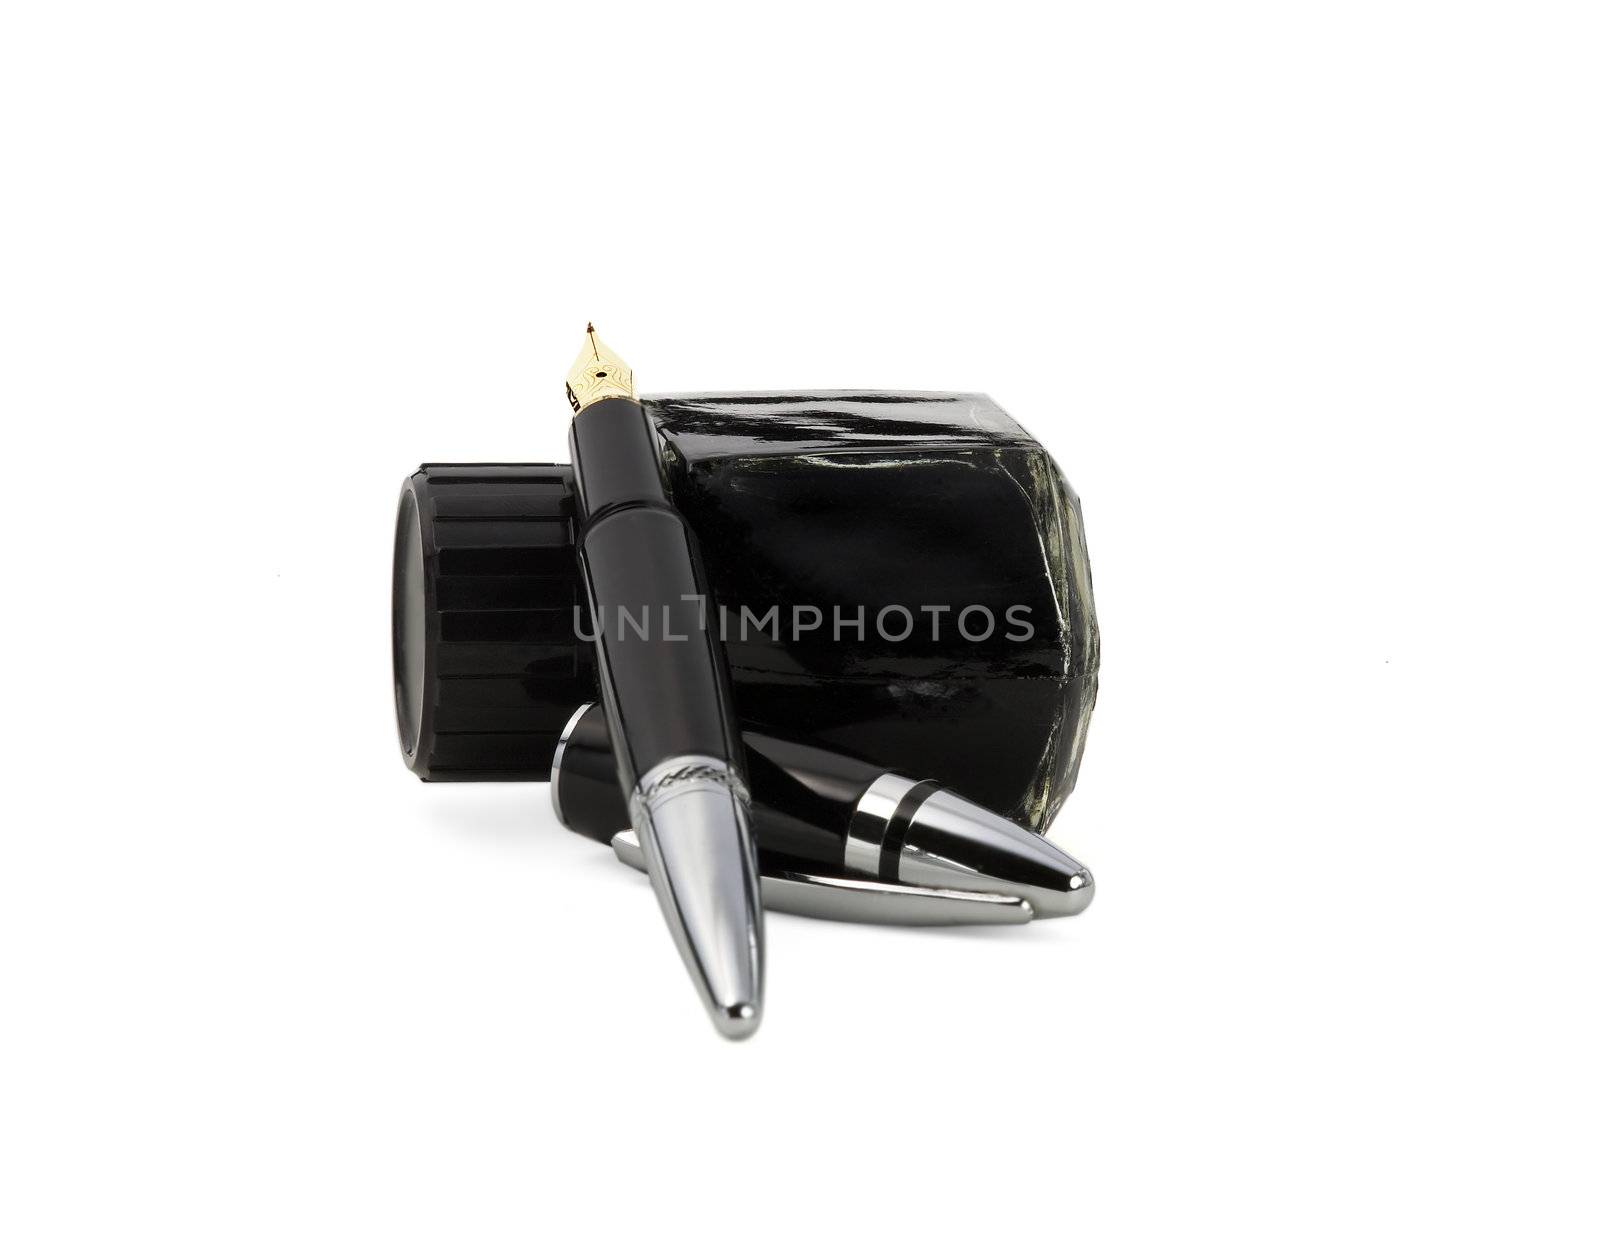 fountain pen and black ink bottle isolated on white background